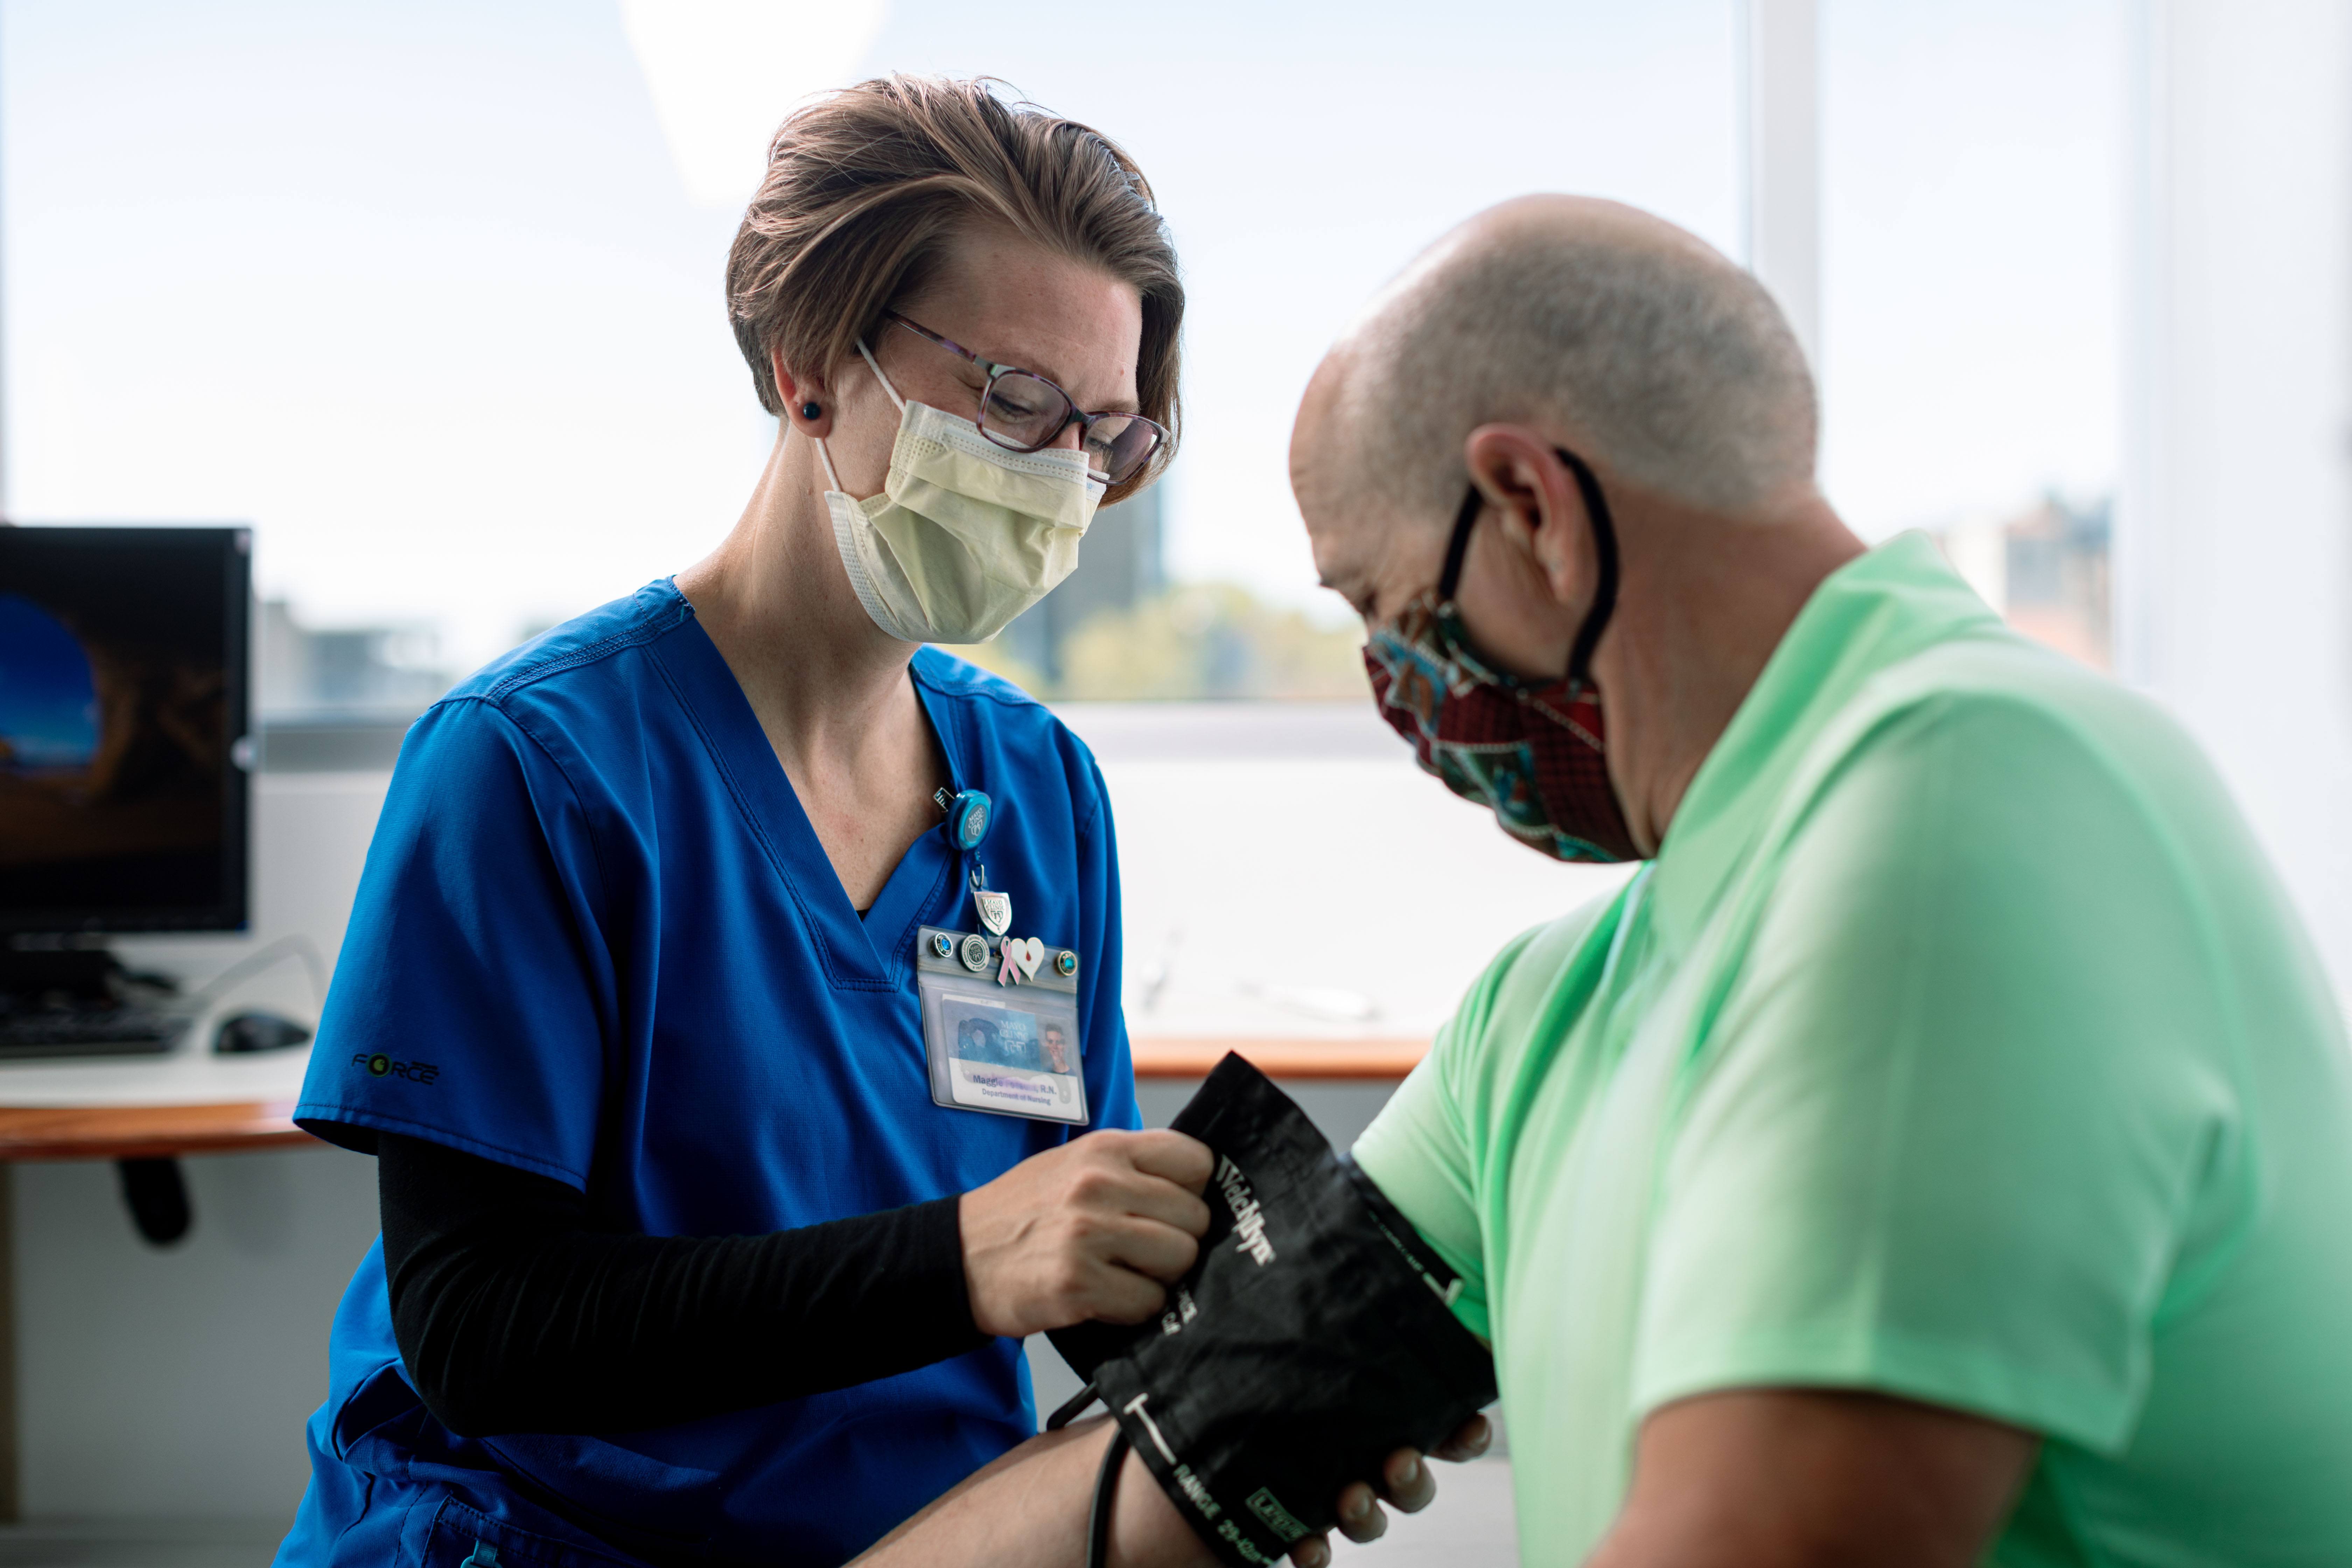 a white woman, Mayo Clinic health care worker in blue scrubs and wearing a mask is taking a white man's blood pressure, who is also wearing a mask